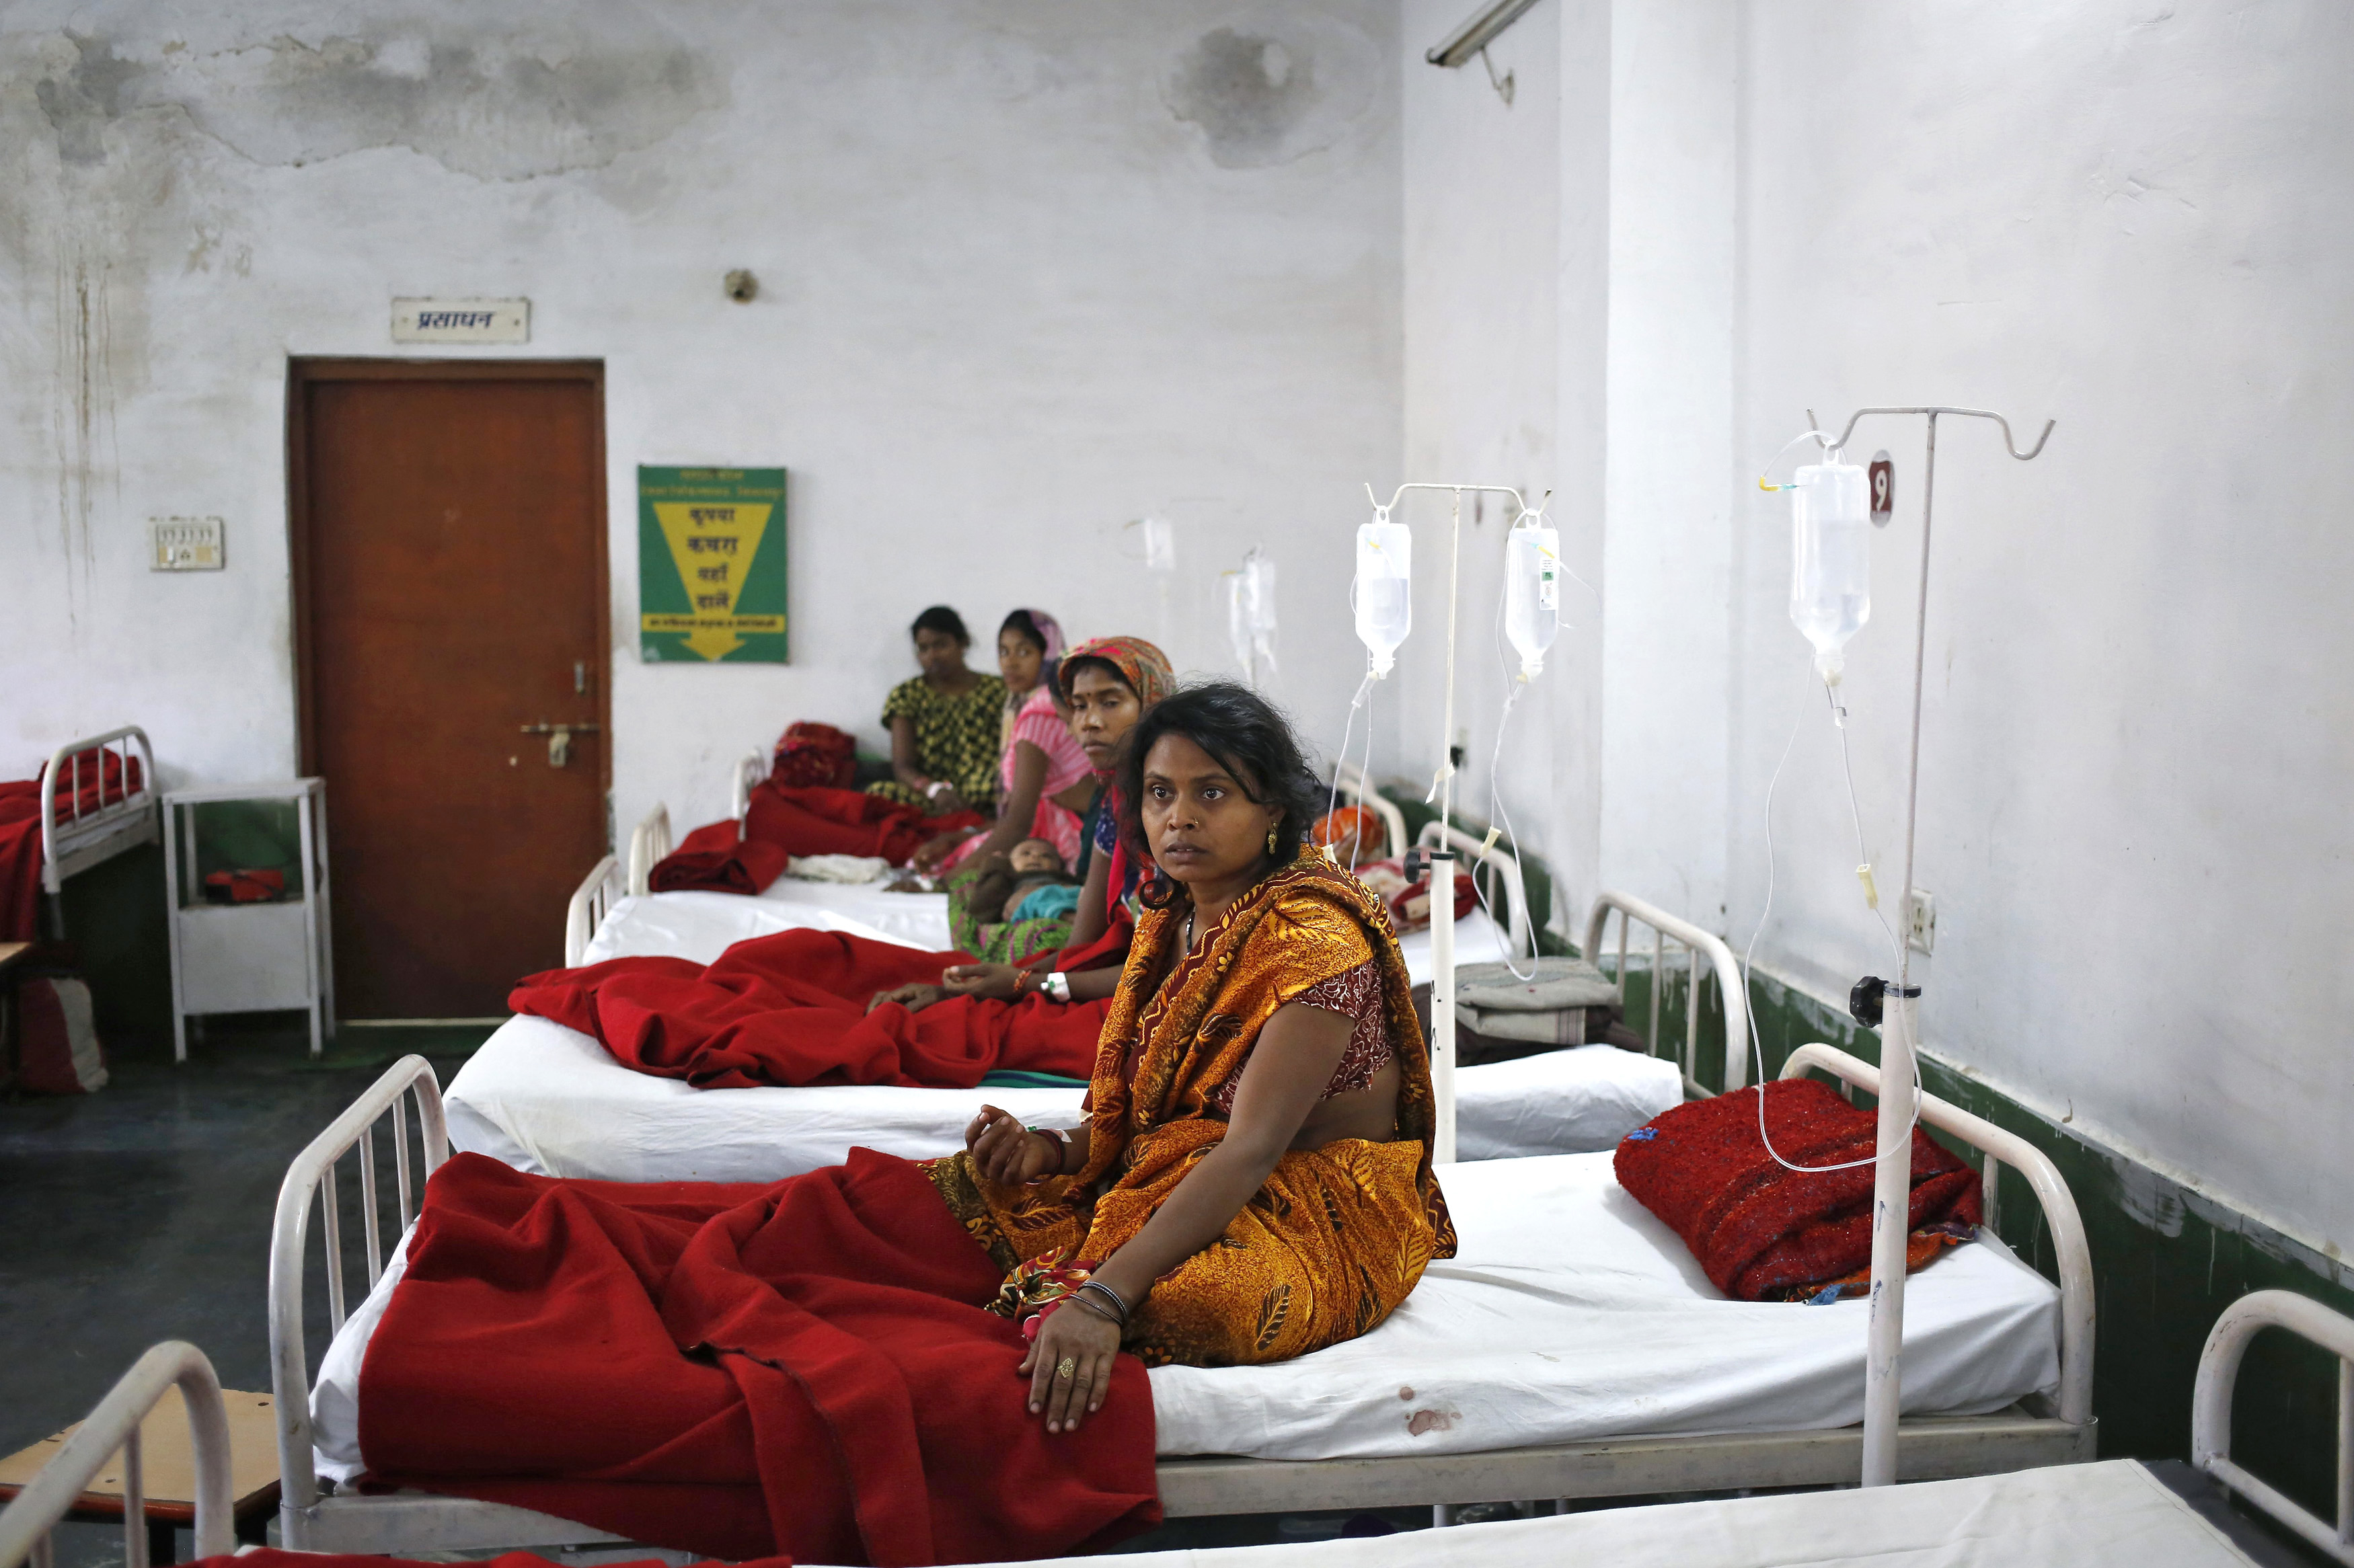 Women, who underwent a sterilization surgery at a government mass-sterilization "camp," lie in hospital beds for treatment at the Chhattisgarh Institute of Medical Sciences hospital in Bilaspur, in the eastern Indian state of Chhattisgarh, on Nov. 13, 2014 (Anindito Mukherjee—Reuters)